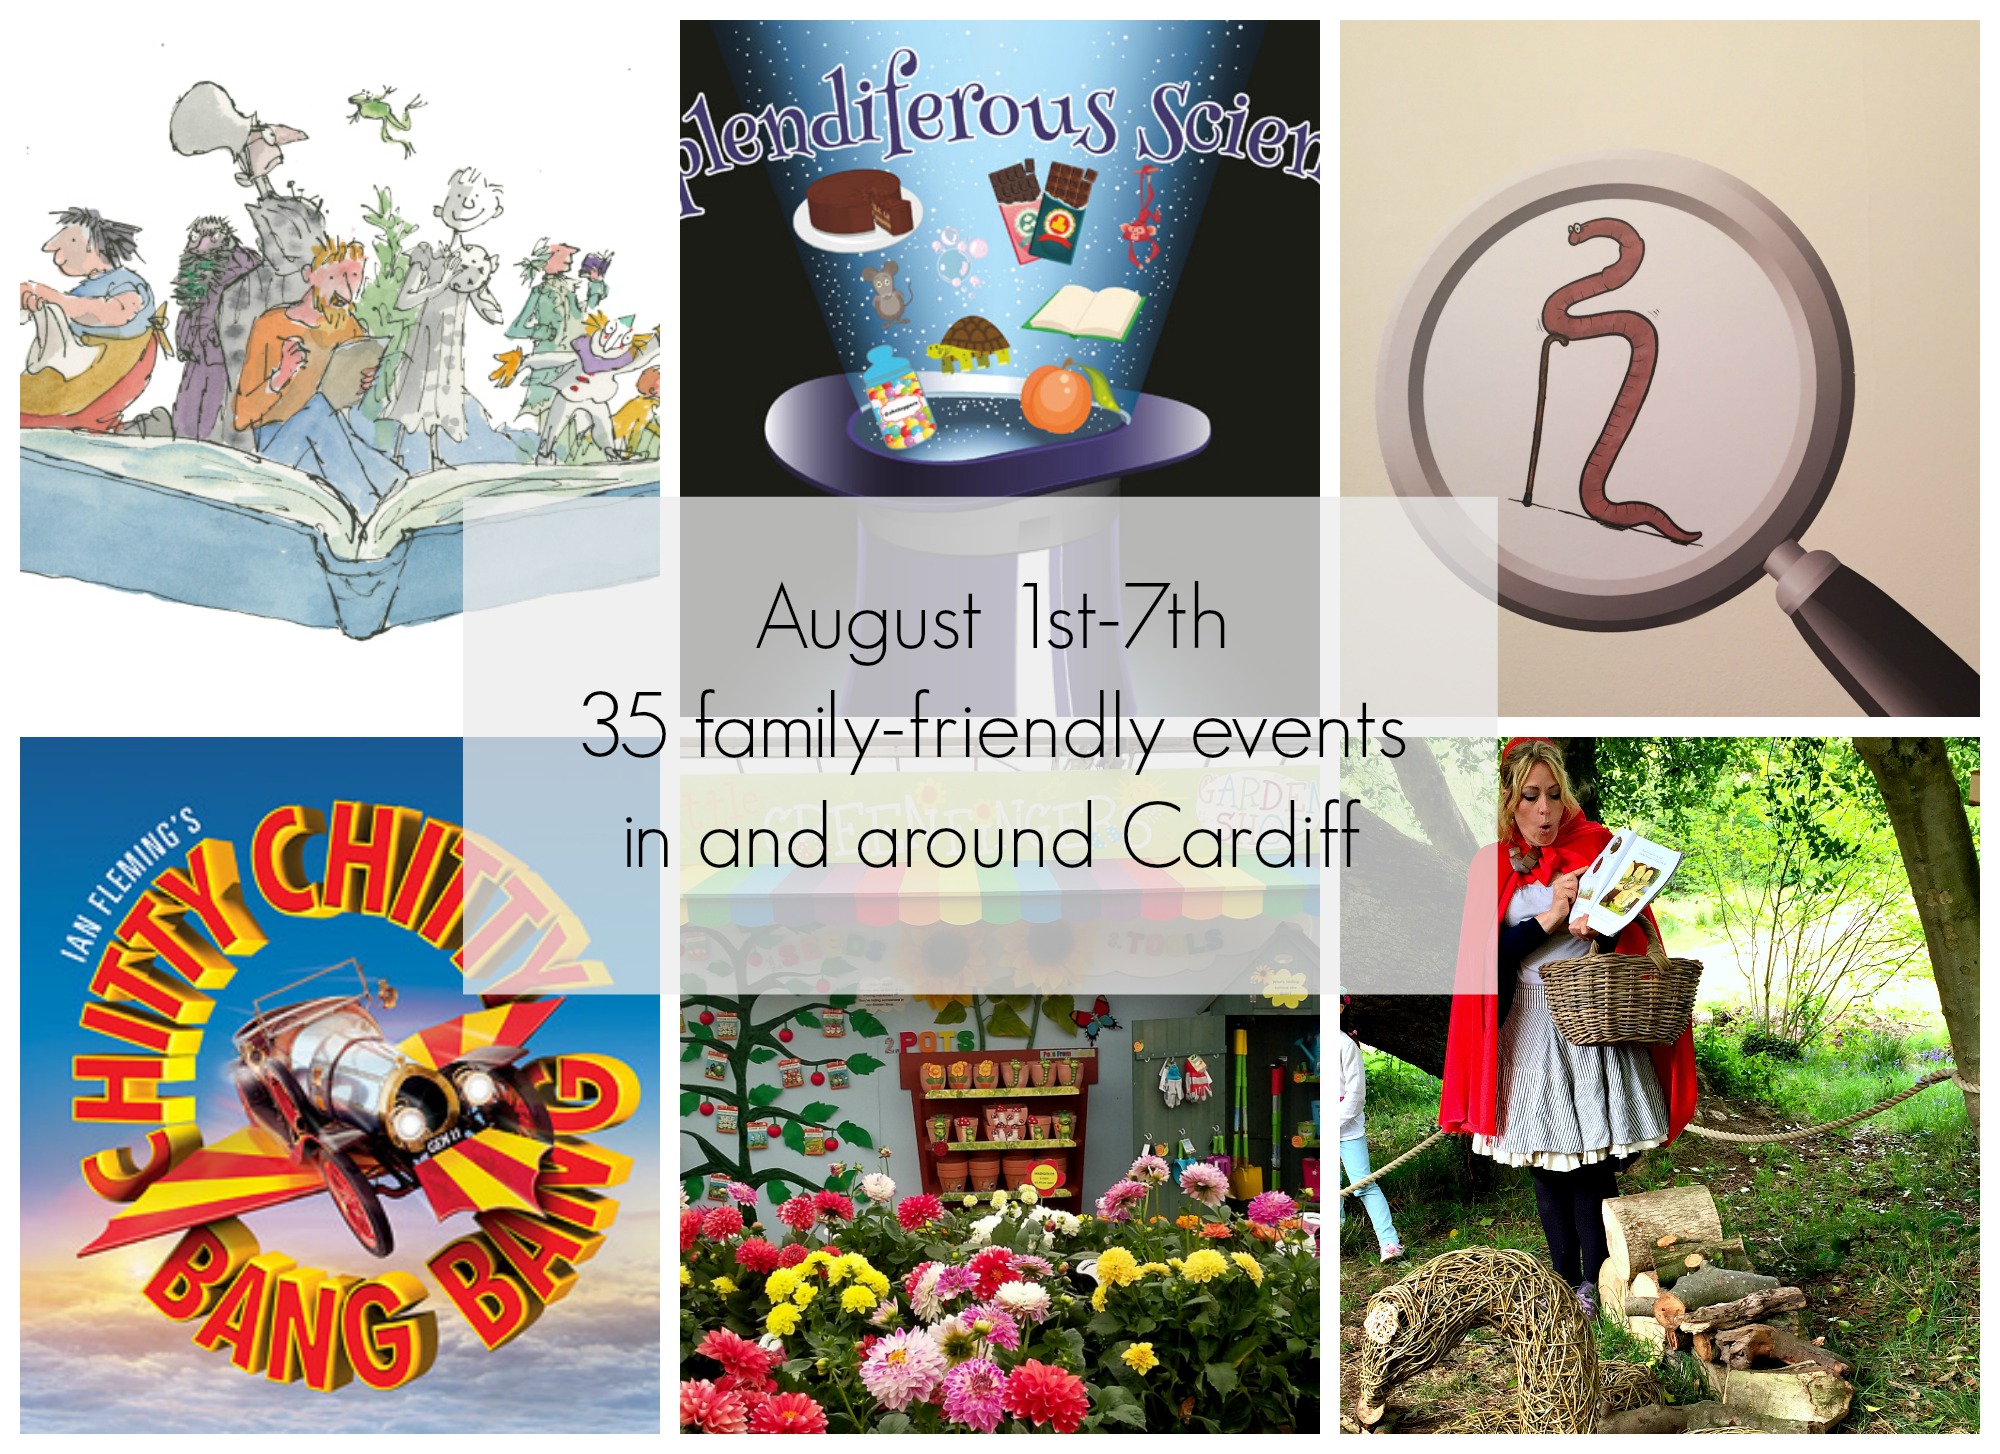 1-7 August 2016 events collage